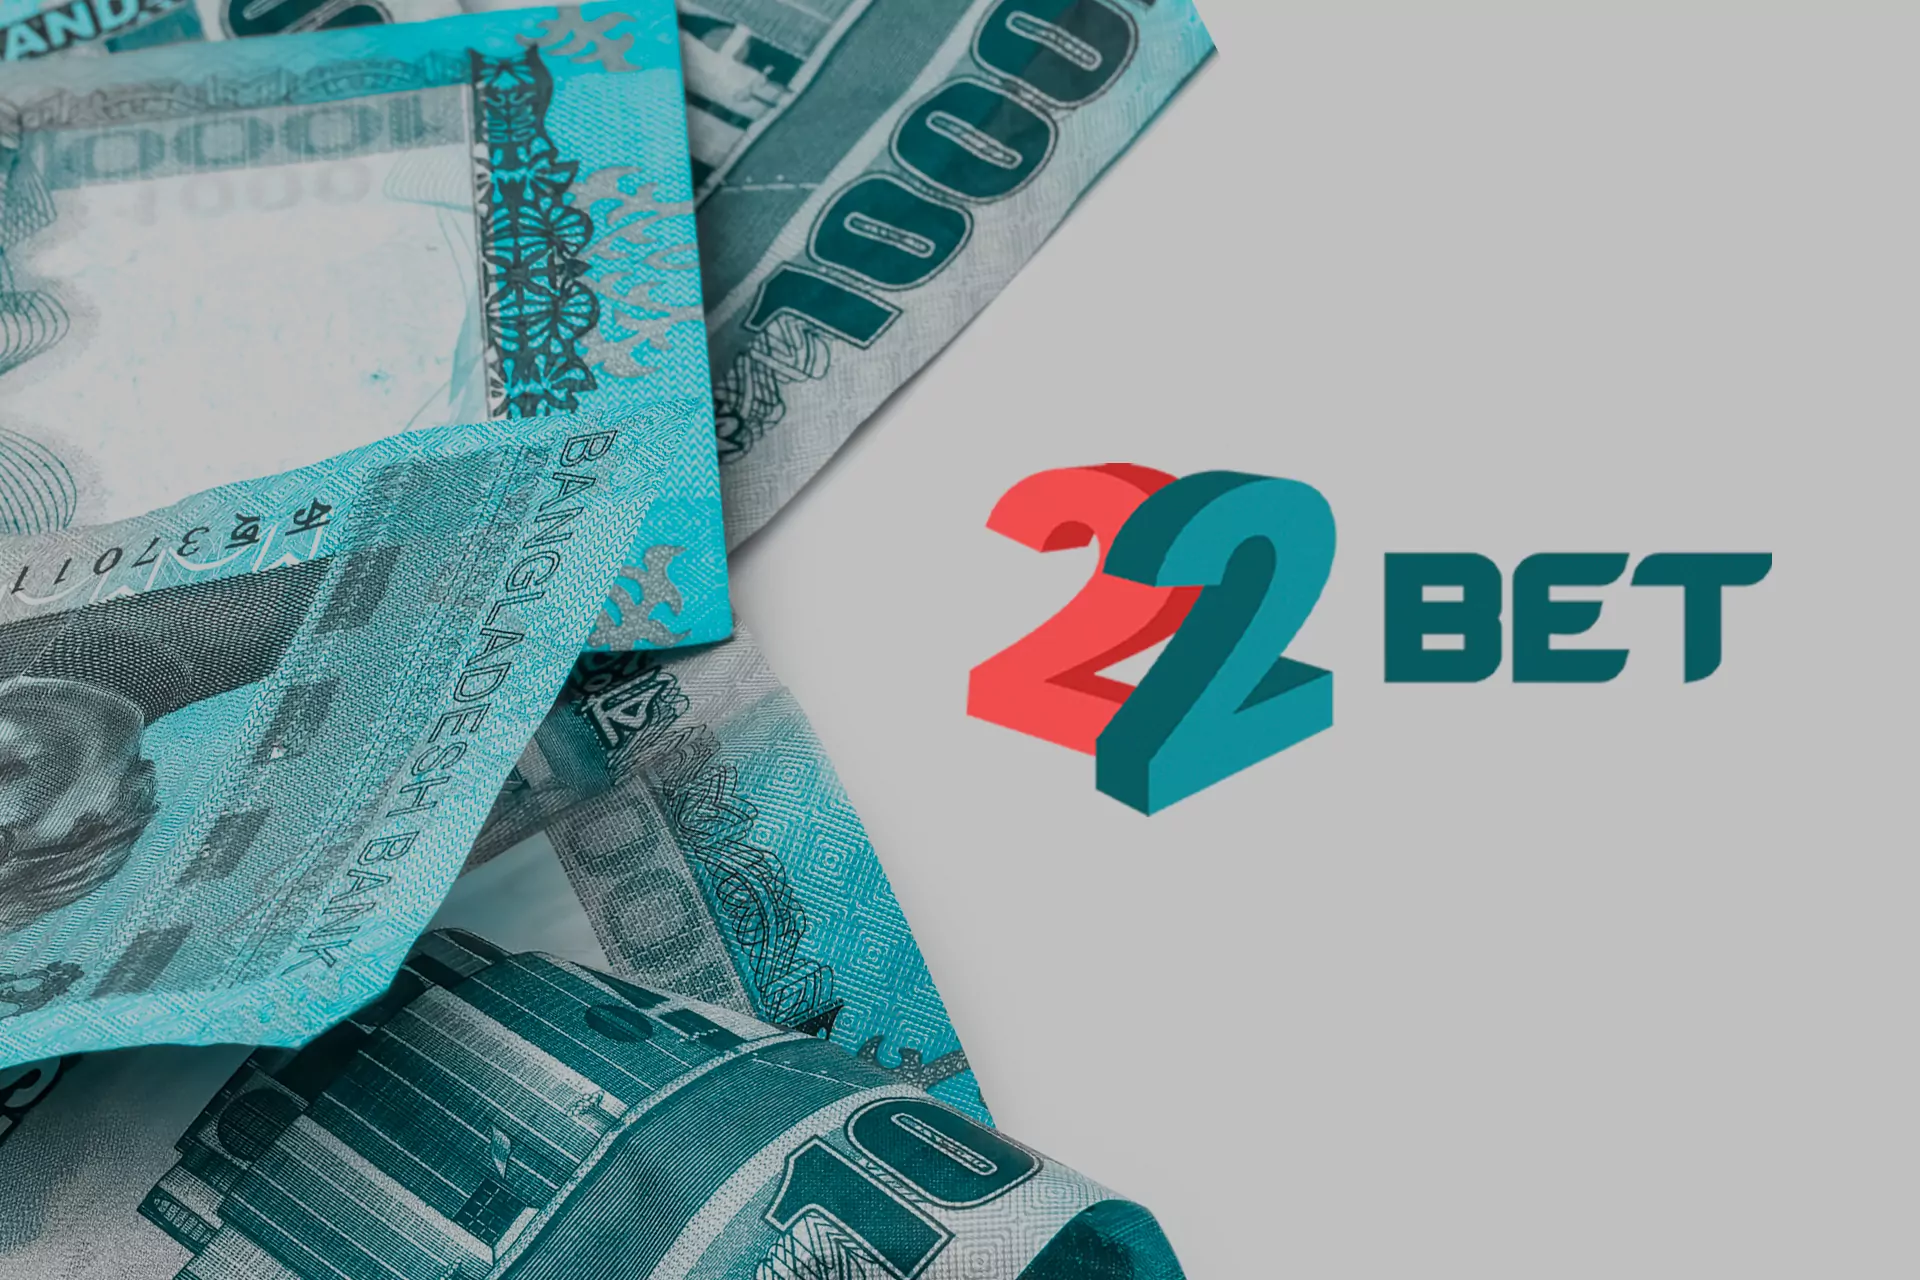 Before betting on the 22bet site or in the app, top up your account.